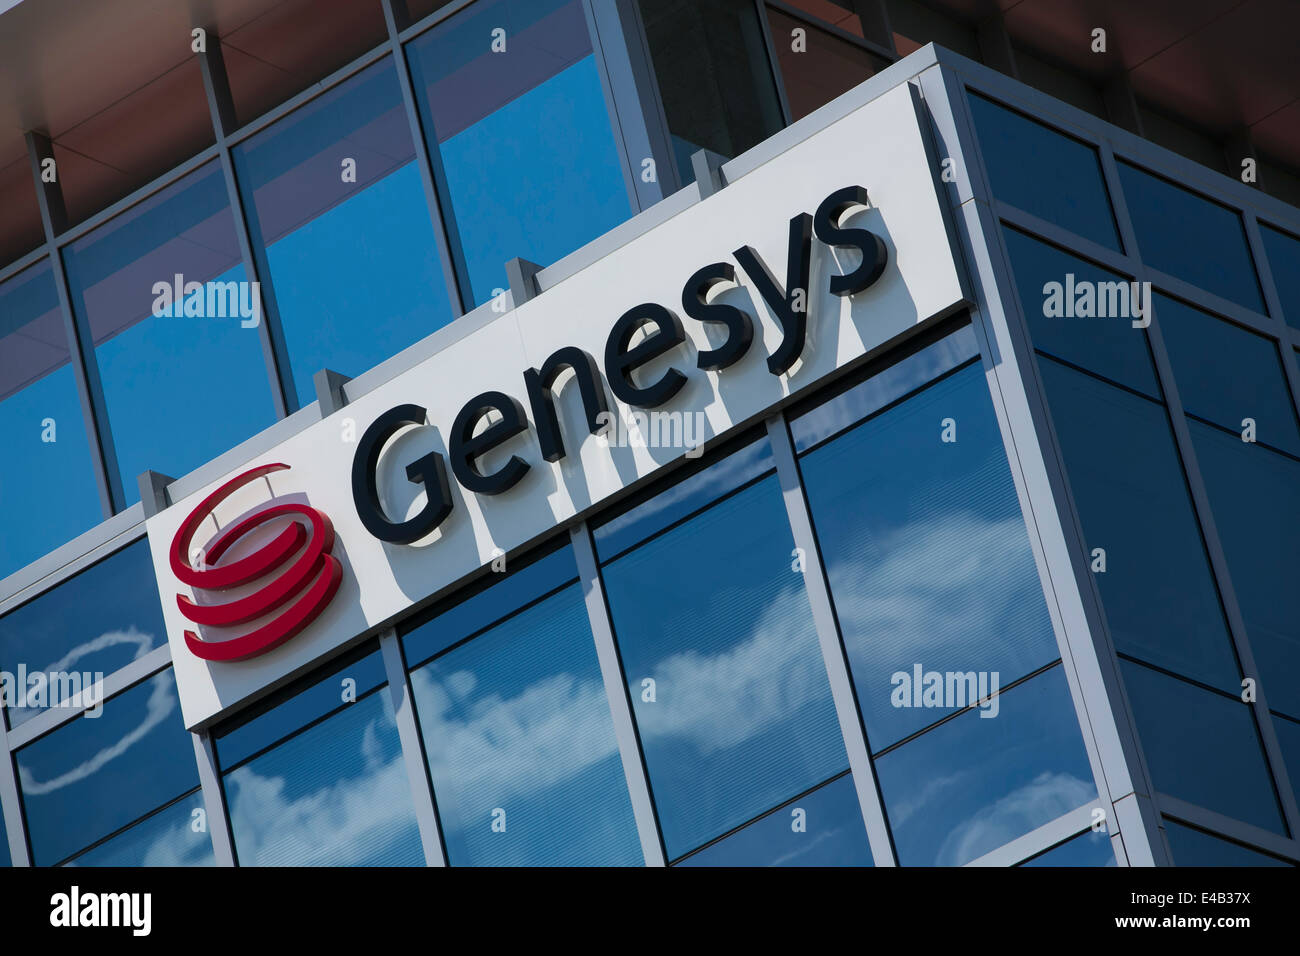 An office building occupied by the telecommunications technology company Genesys.  Stock Photo